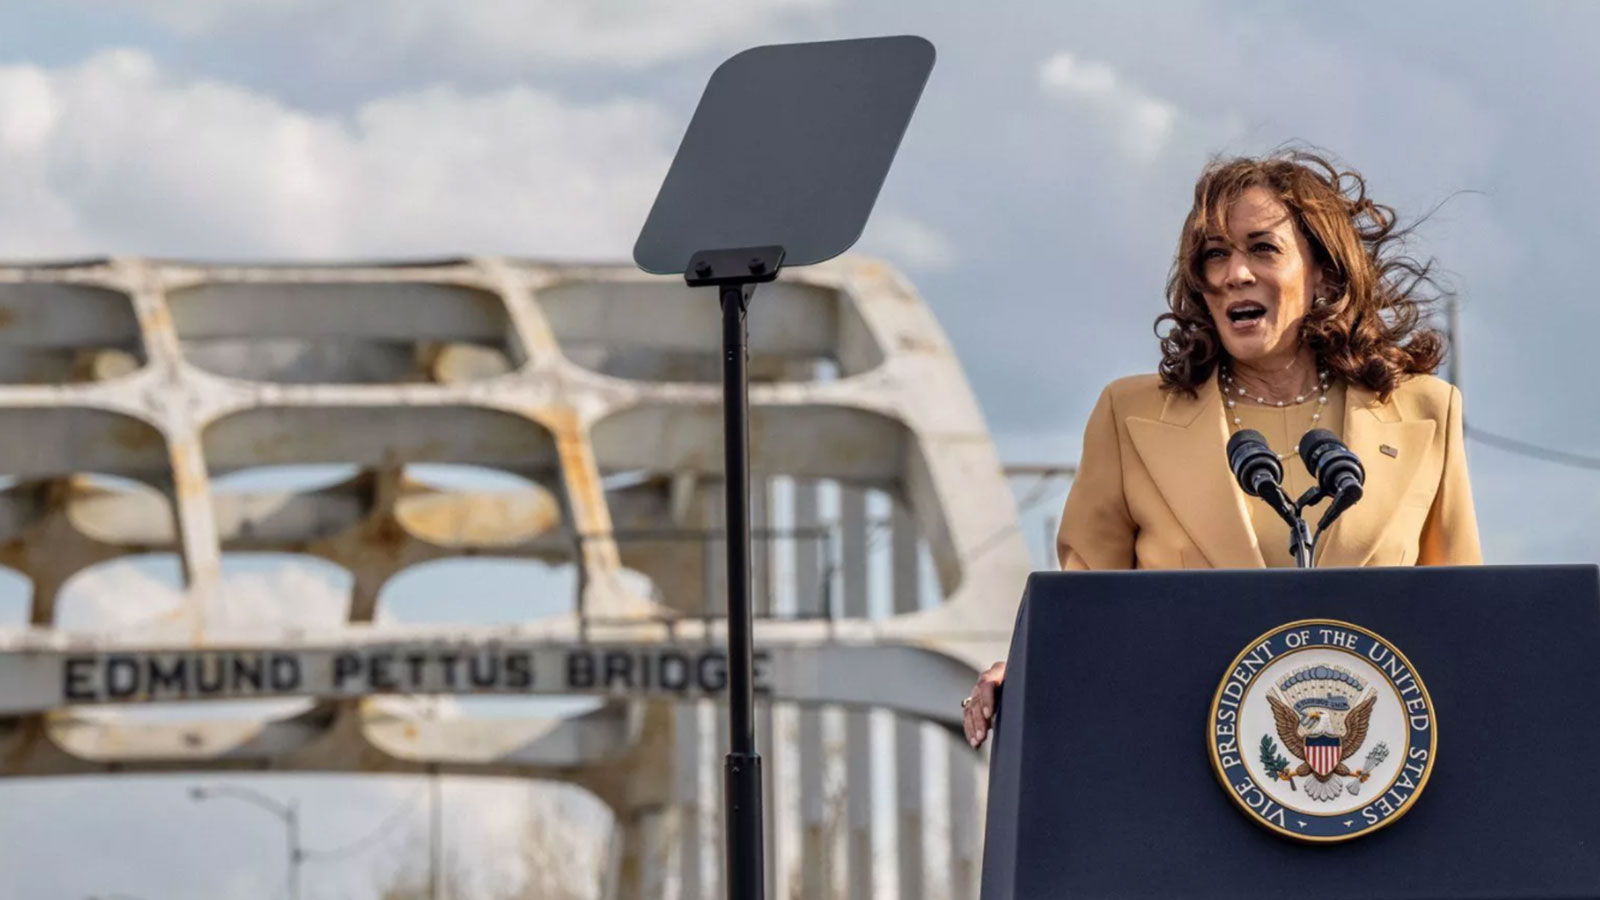 VP Harris champions voting rights on ‘Bloody Sunday’ anniversary: ‘We will not let setbacks stop us’